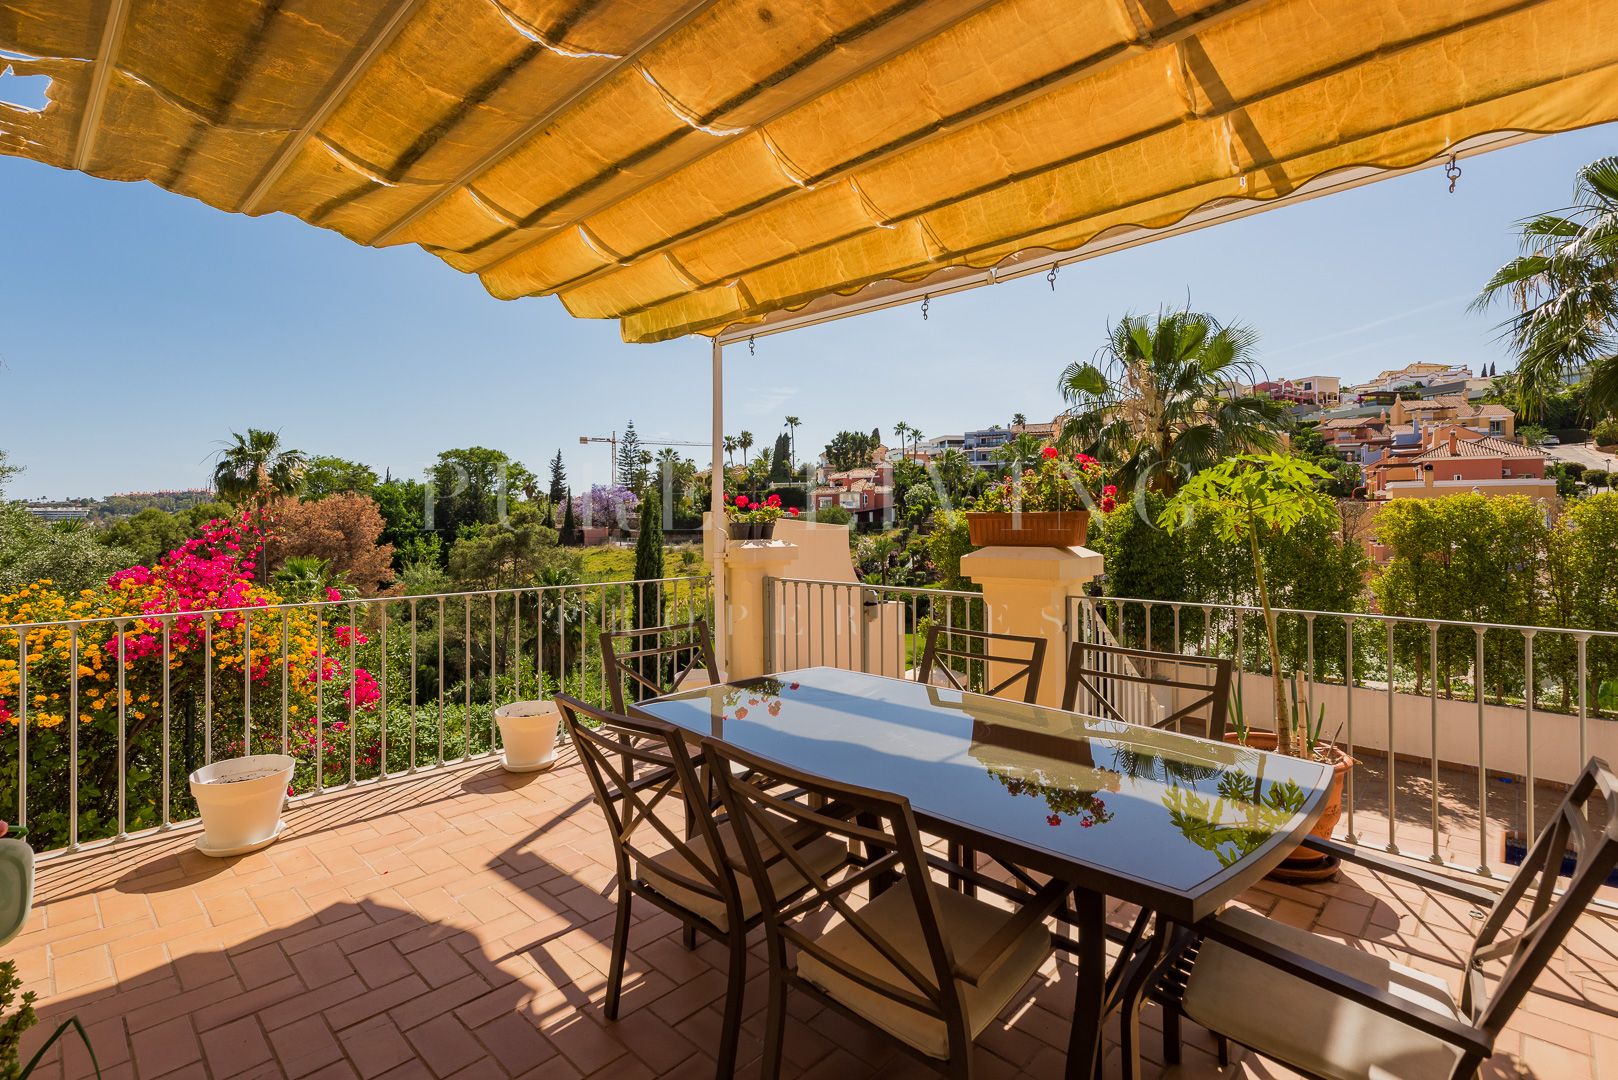 Excellent four bedroom villa located in the highly sought after area, Nueva Andalucía